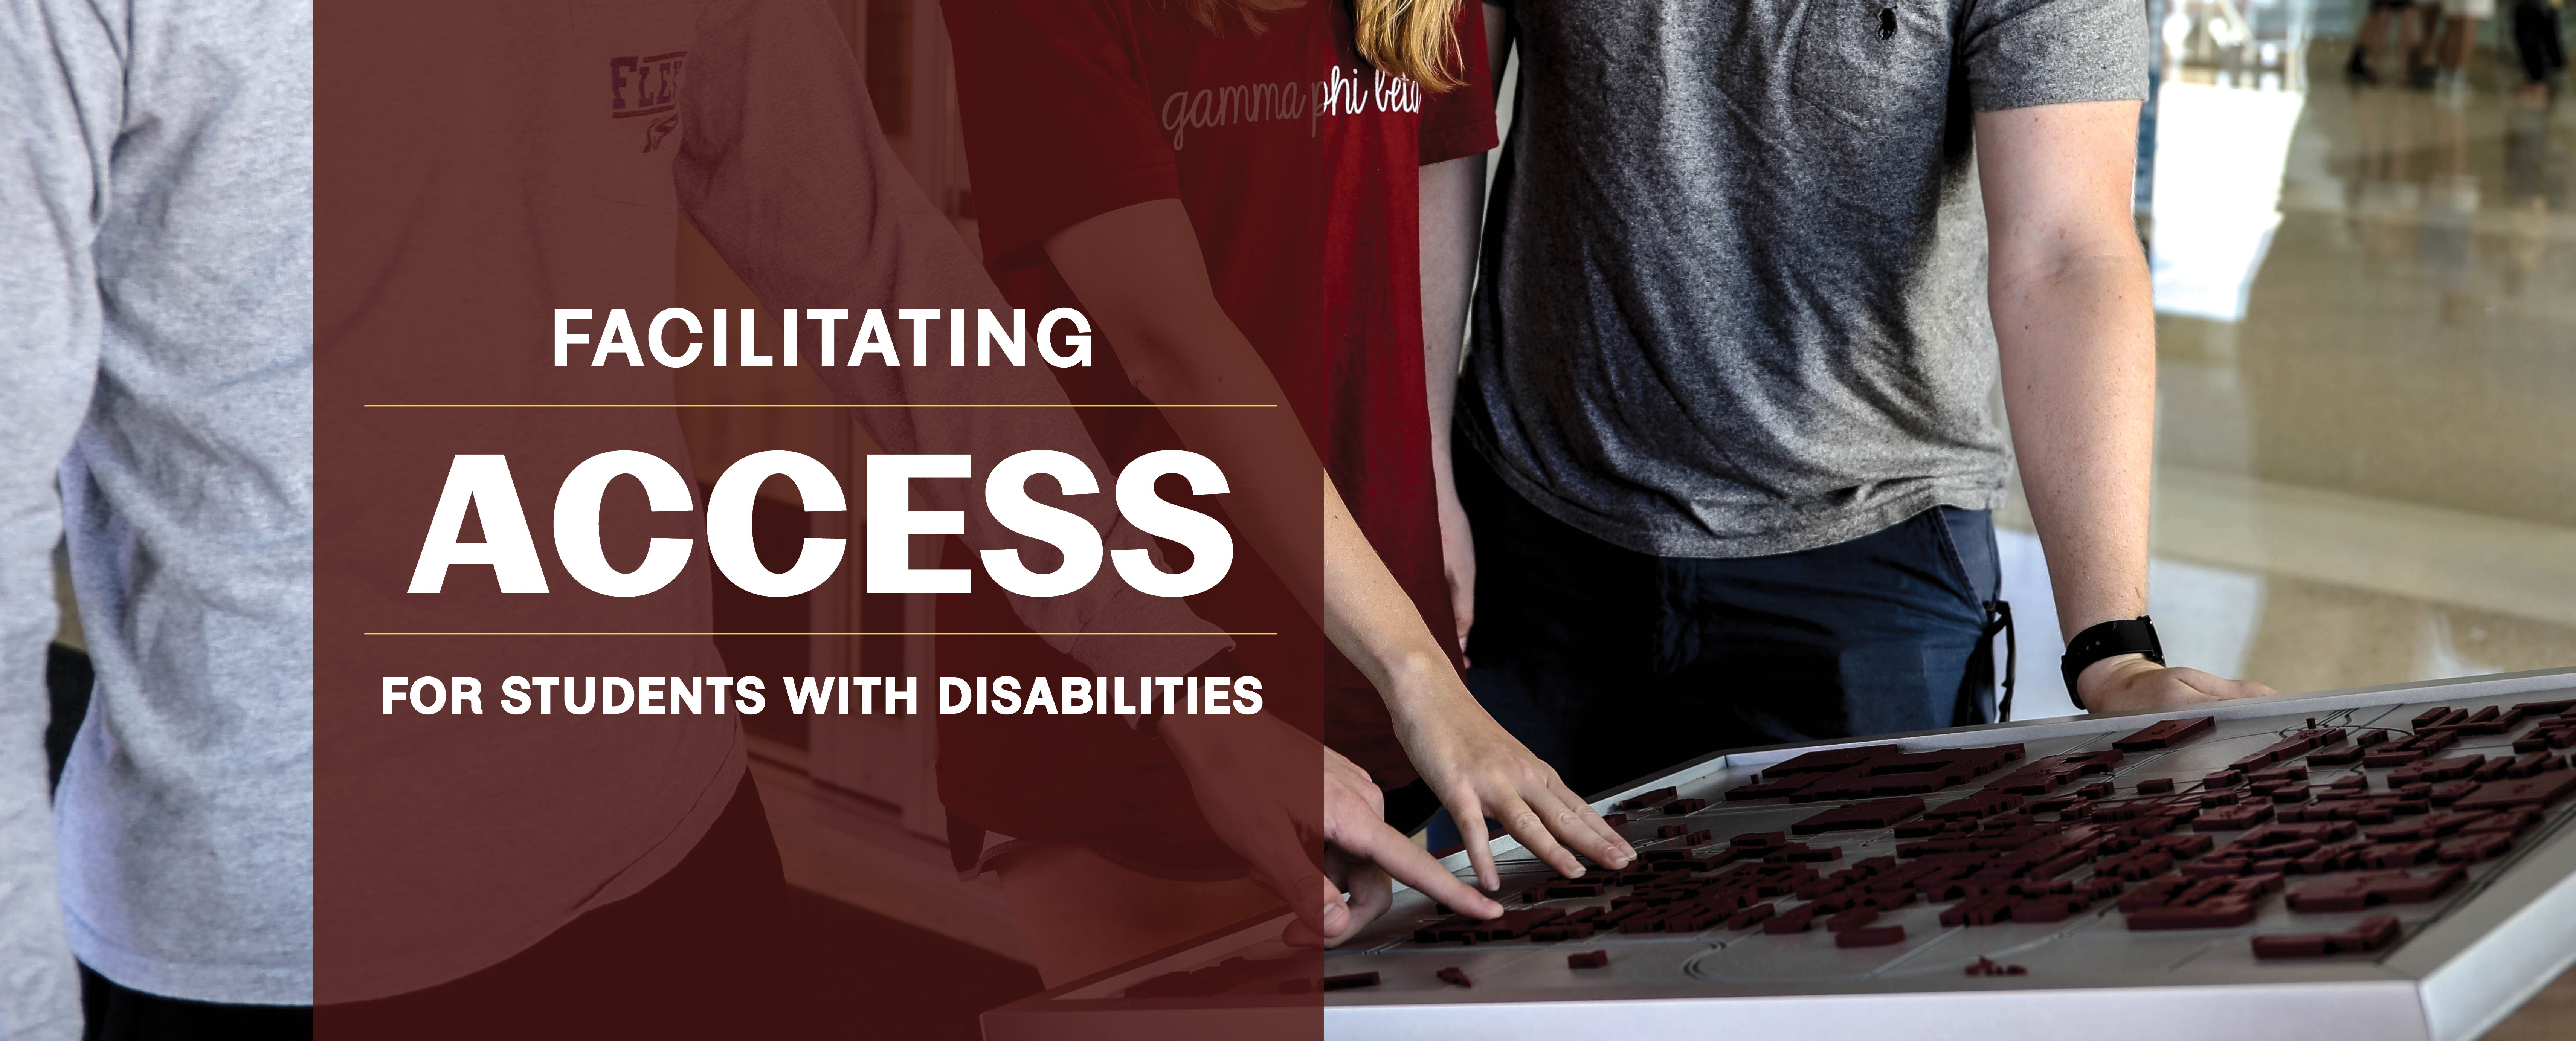 Facilitating Access For Students with Disabilities